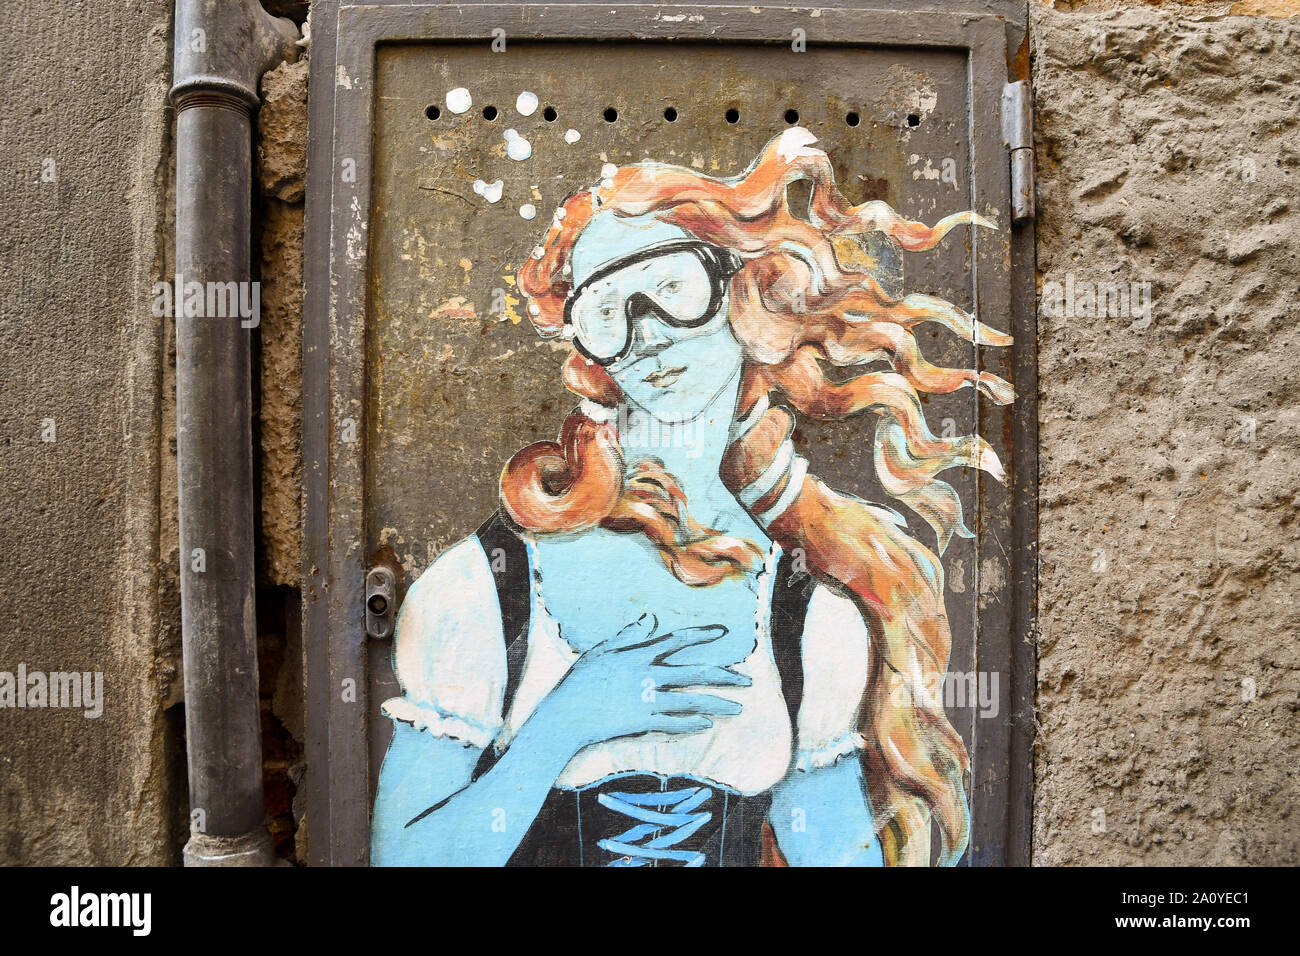 The old metal door of a gas meter with an artwork by the street artist Blub inspired by the Venus of Botticelli in a street of Lucca, Tuscany, Italy Stock Photo